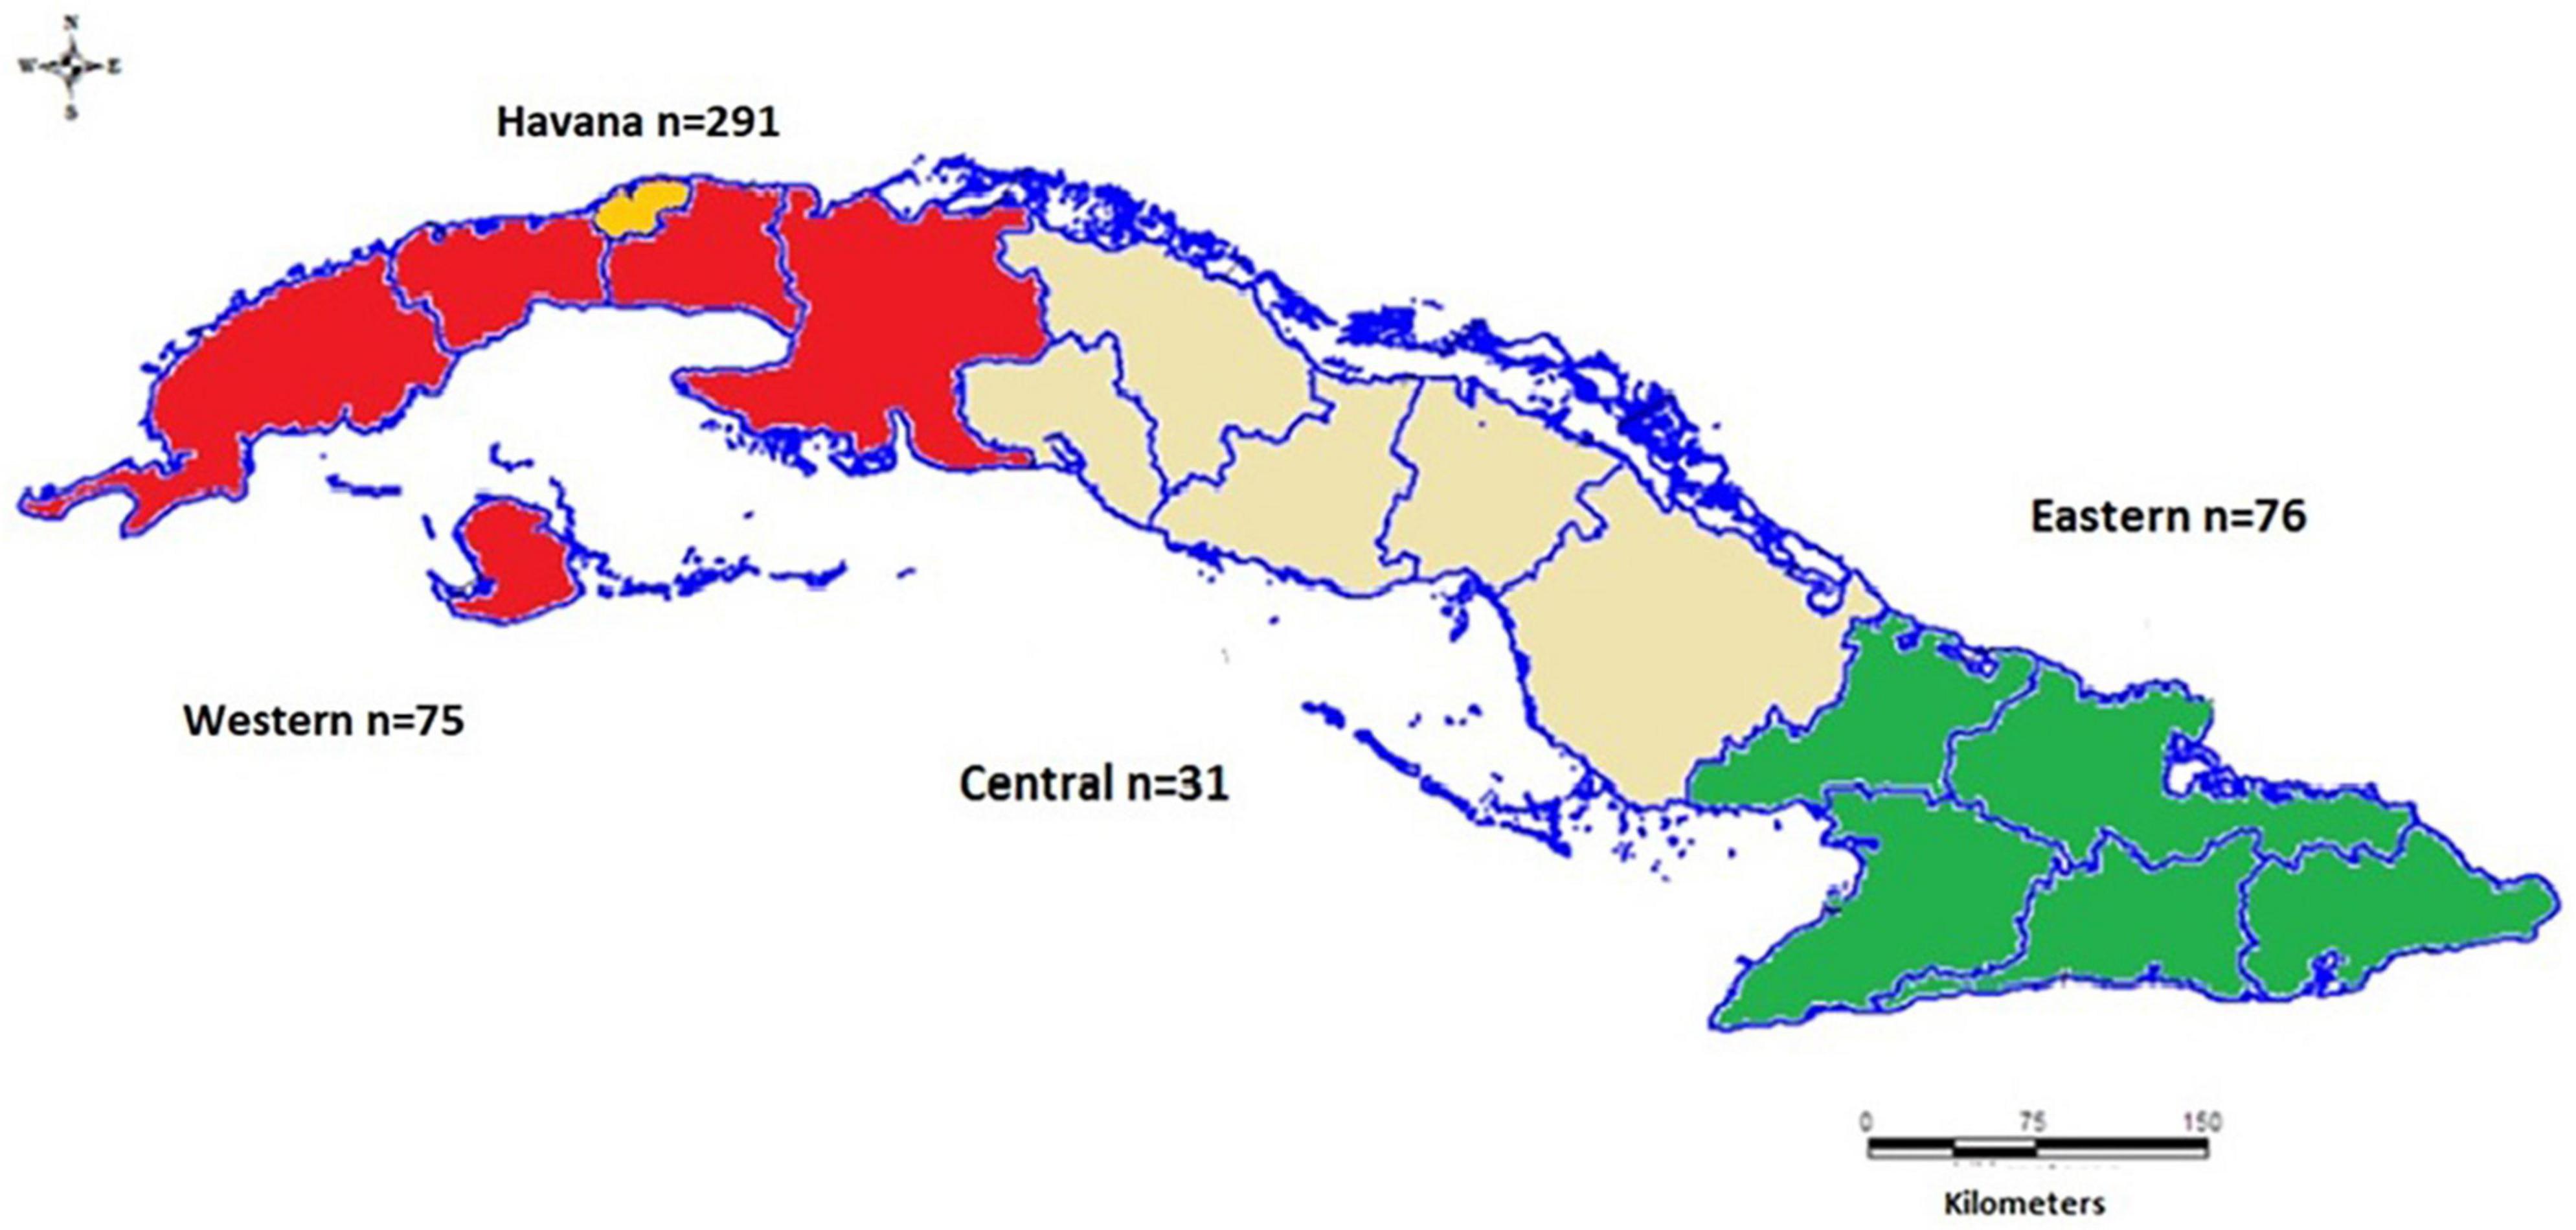 Low prevalence of hepatitis delta infection in Cuban HBsAg carriers: Prospect for elimination